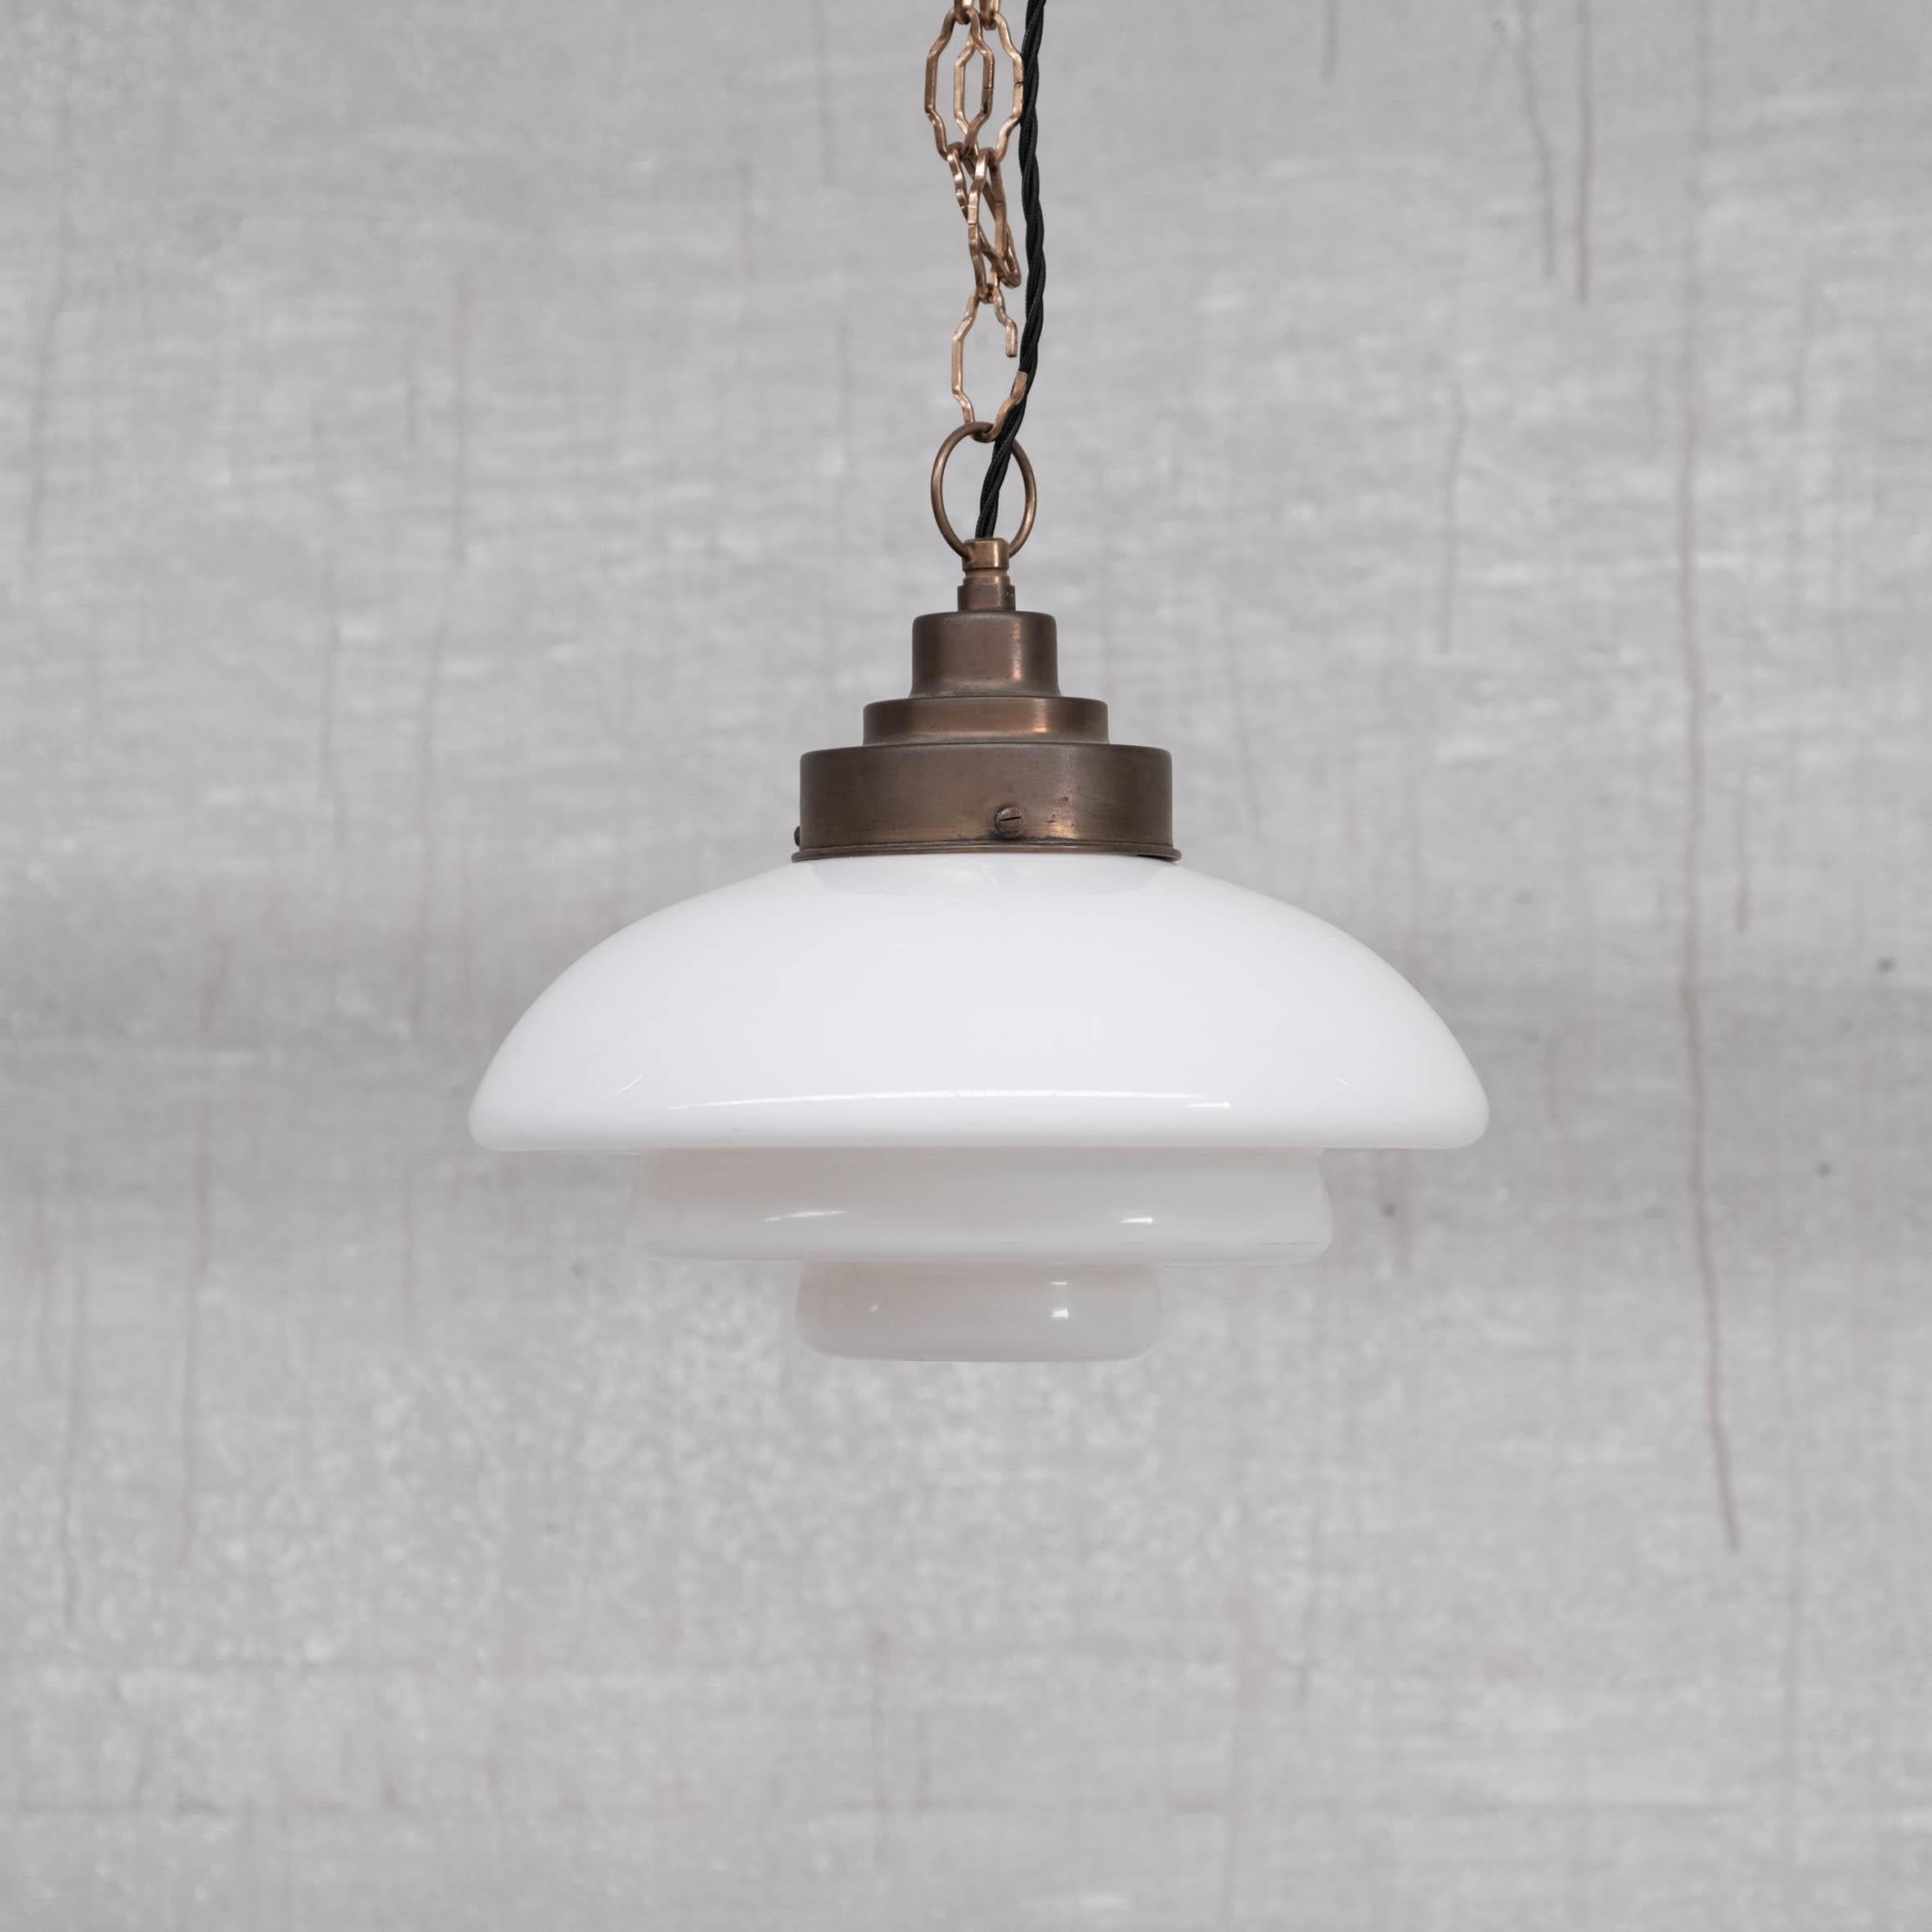 A single stepped opaline pendant. 

Naturally patinated brass gallery. 

France, circa 1950s.

Pleasantly stepped gallery which matches the glass. 

Re-wired and PAT tested. 

No original chain or ceiling rose was retained but these are